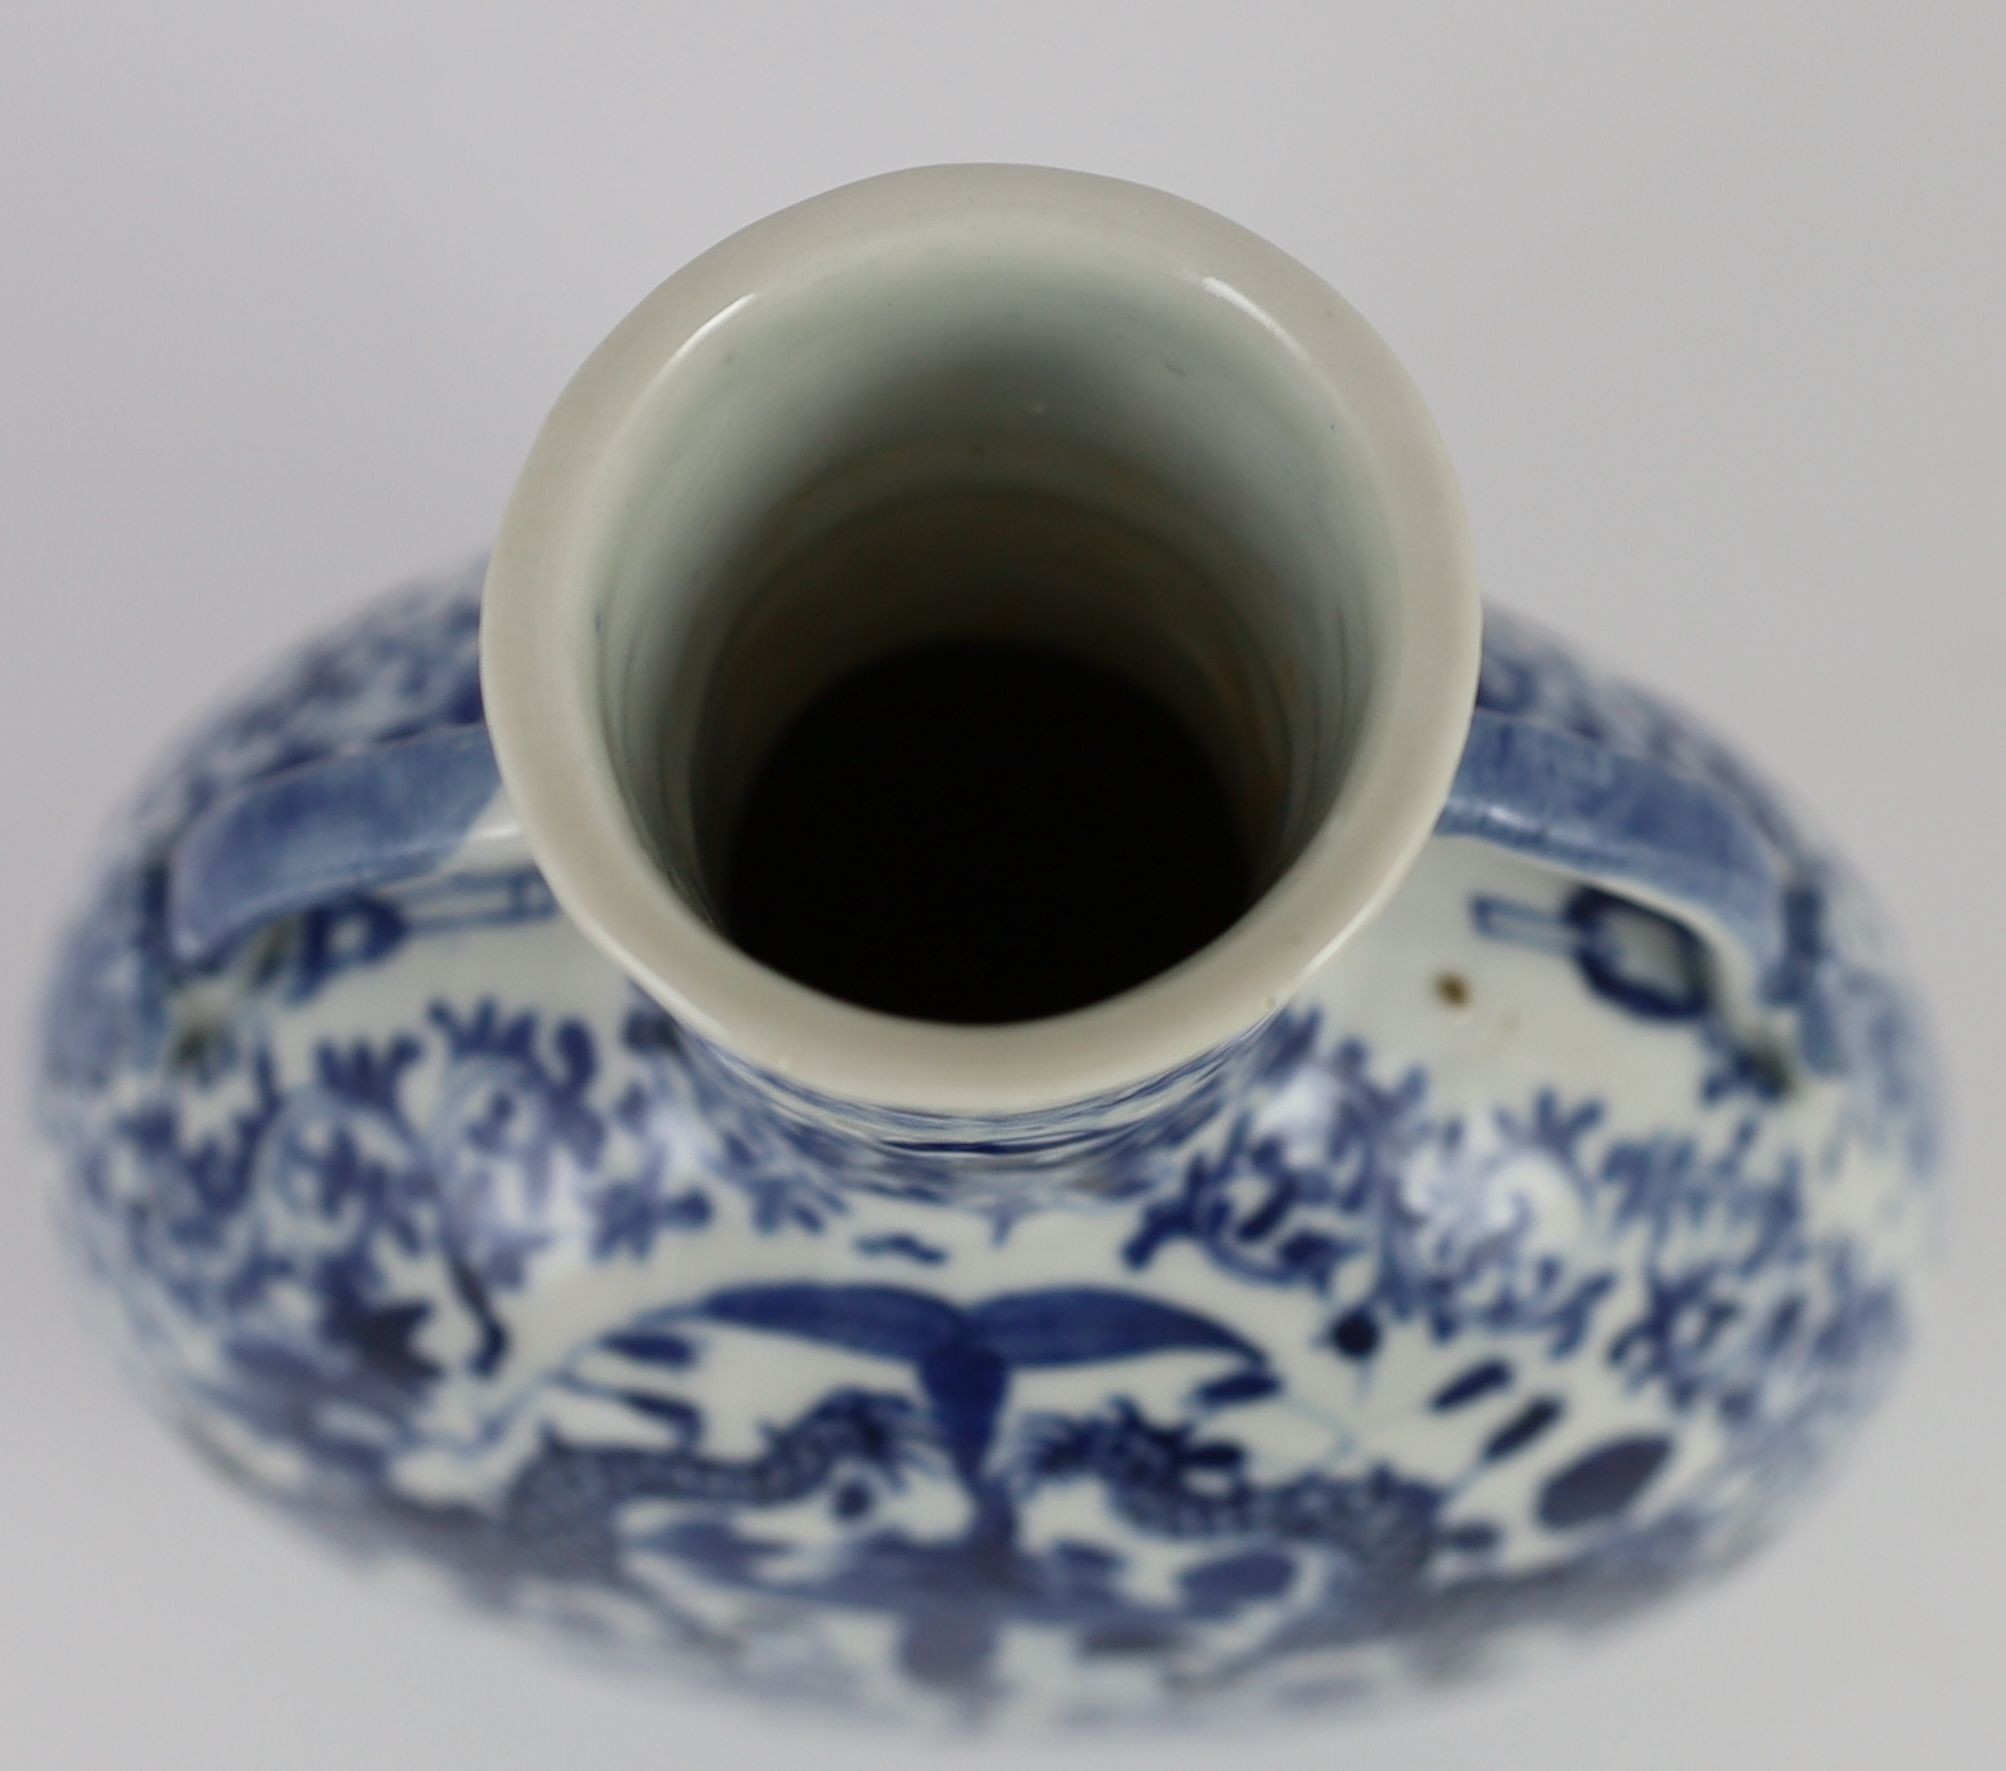 A Chinese blue and white ‘dragon’ moon flask, late 18th century, 20cm high